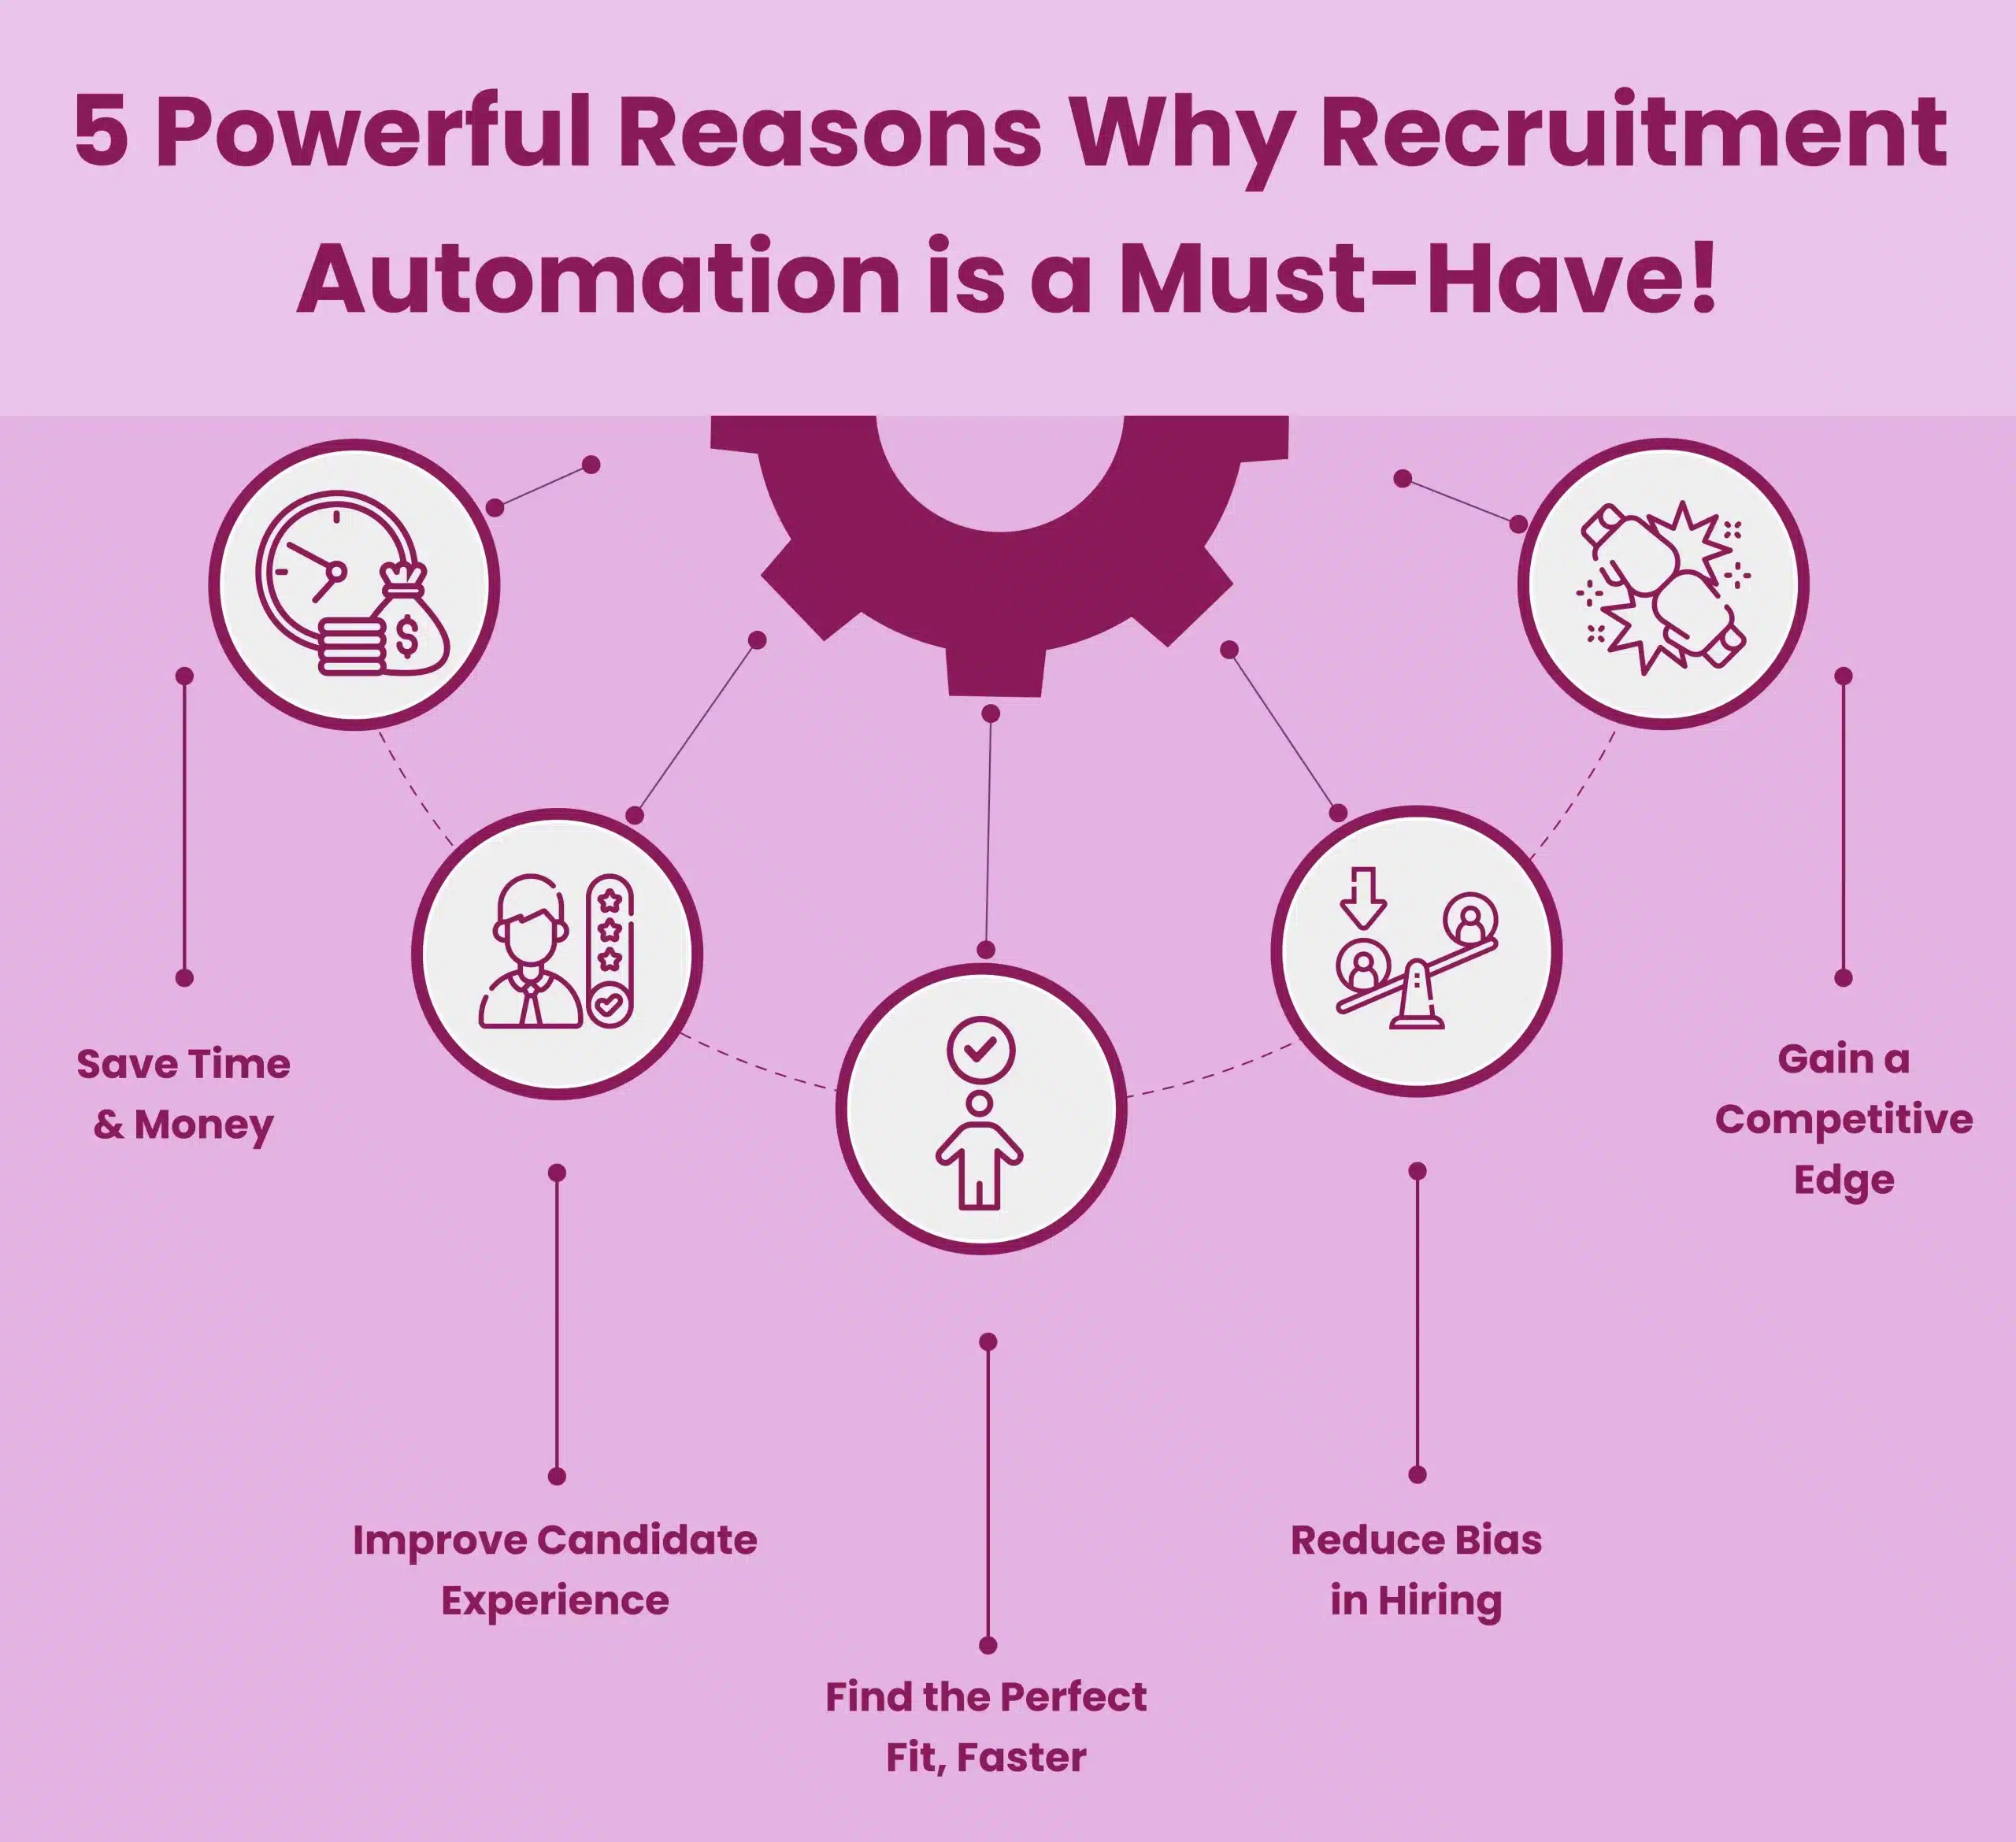 Why Recruitment Automation is a Must-Have